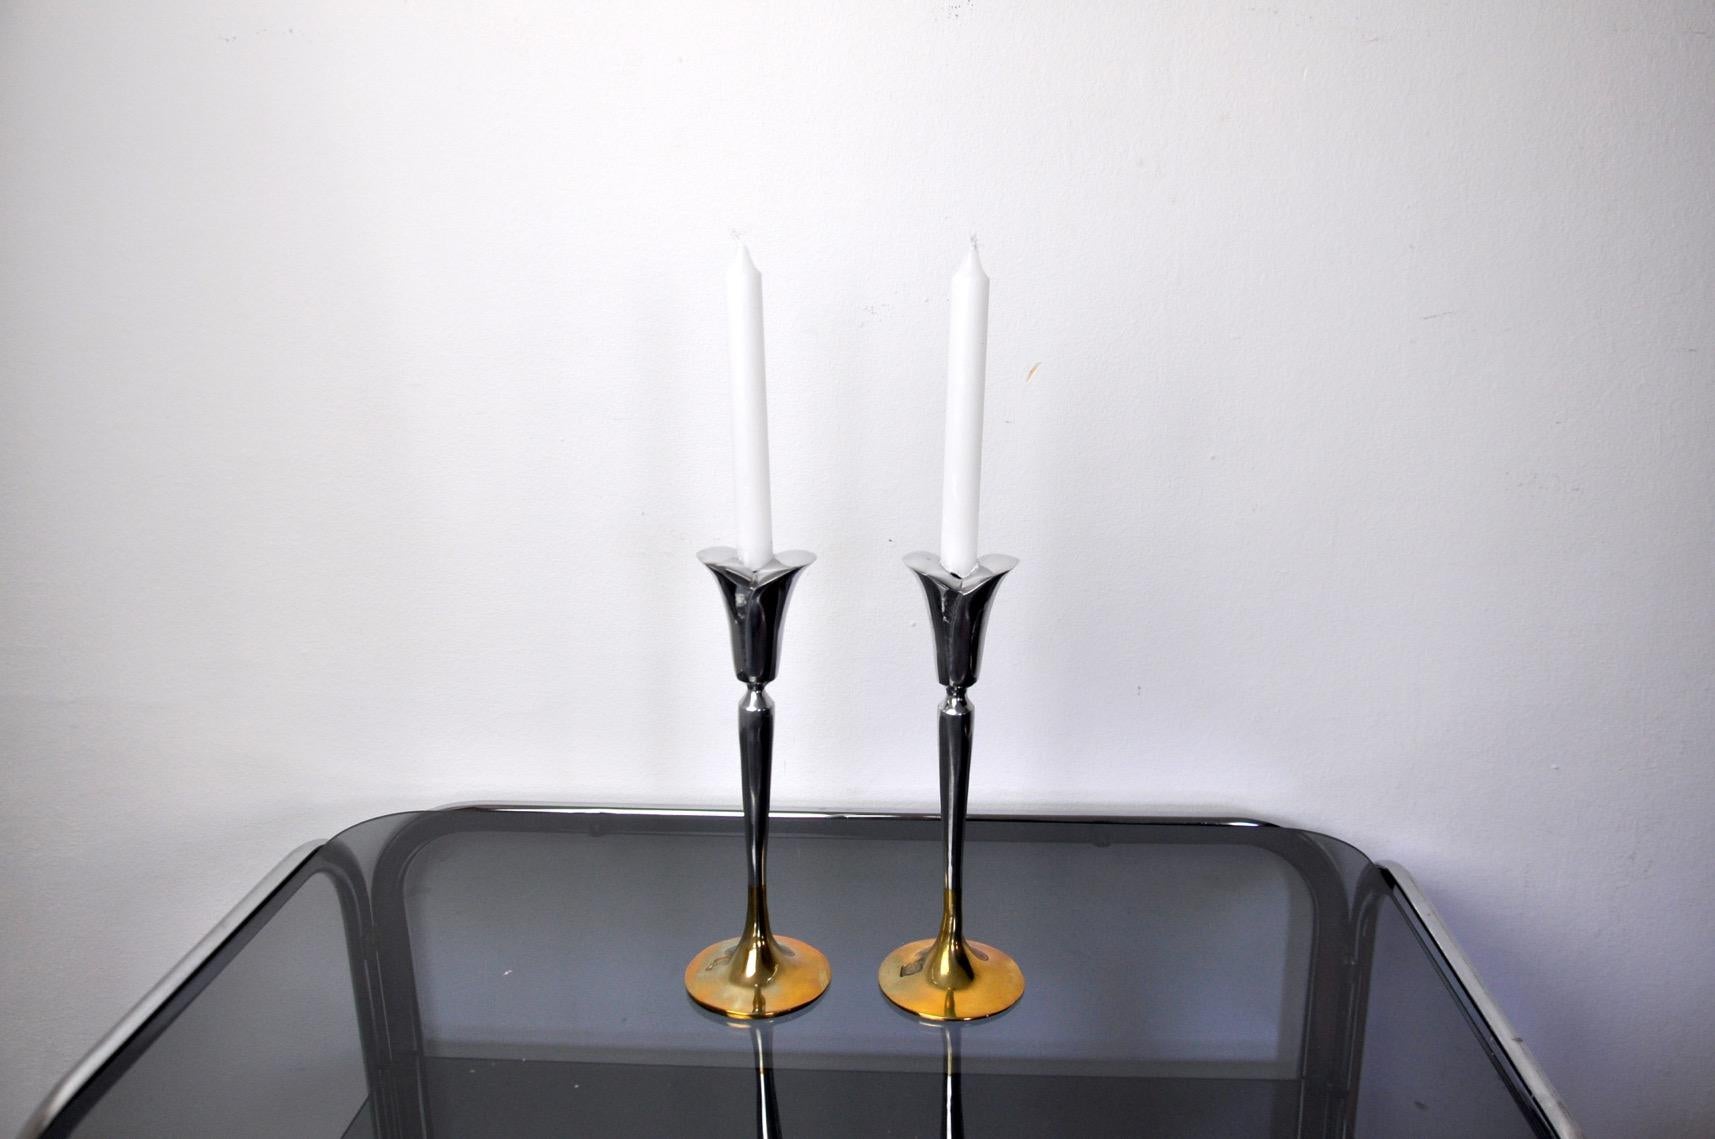 Very nice pair of Brutalist candlesticks designed and produced by art3 spain in spain in the 1970s. Two signed aluminum and gilt metal structures and a base protected by a leather underside. Unique objects that will decorate wonderfully and bring a